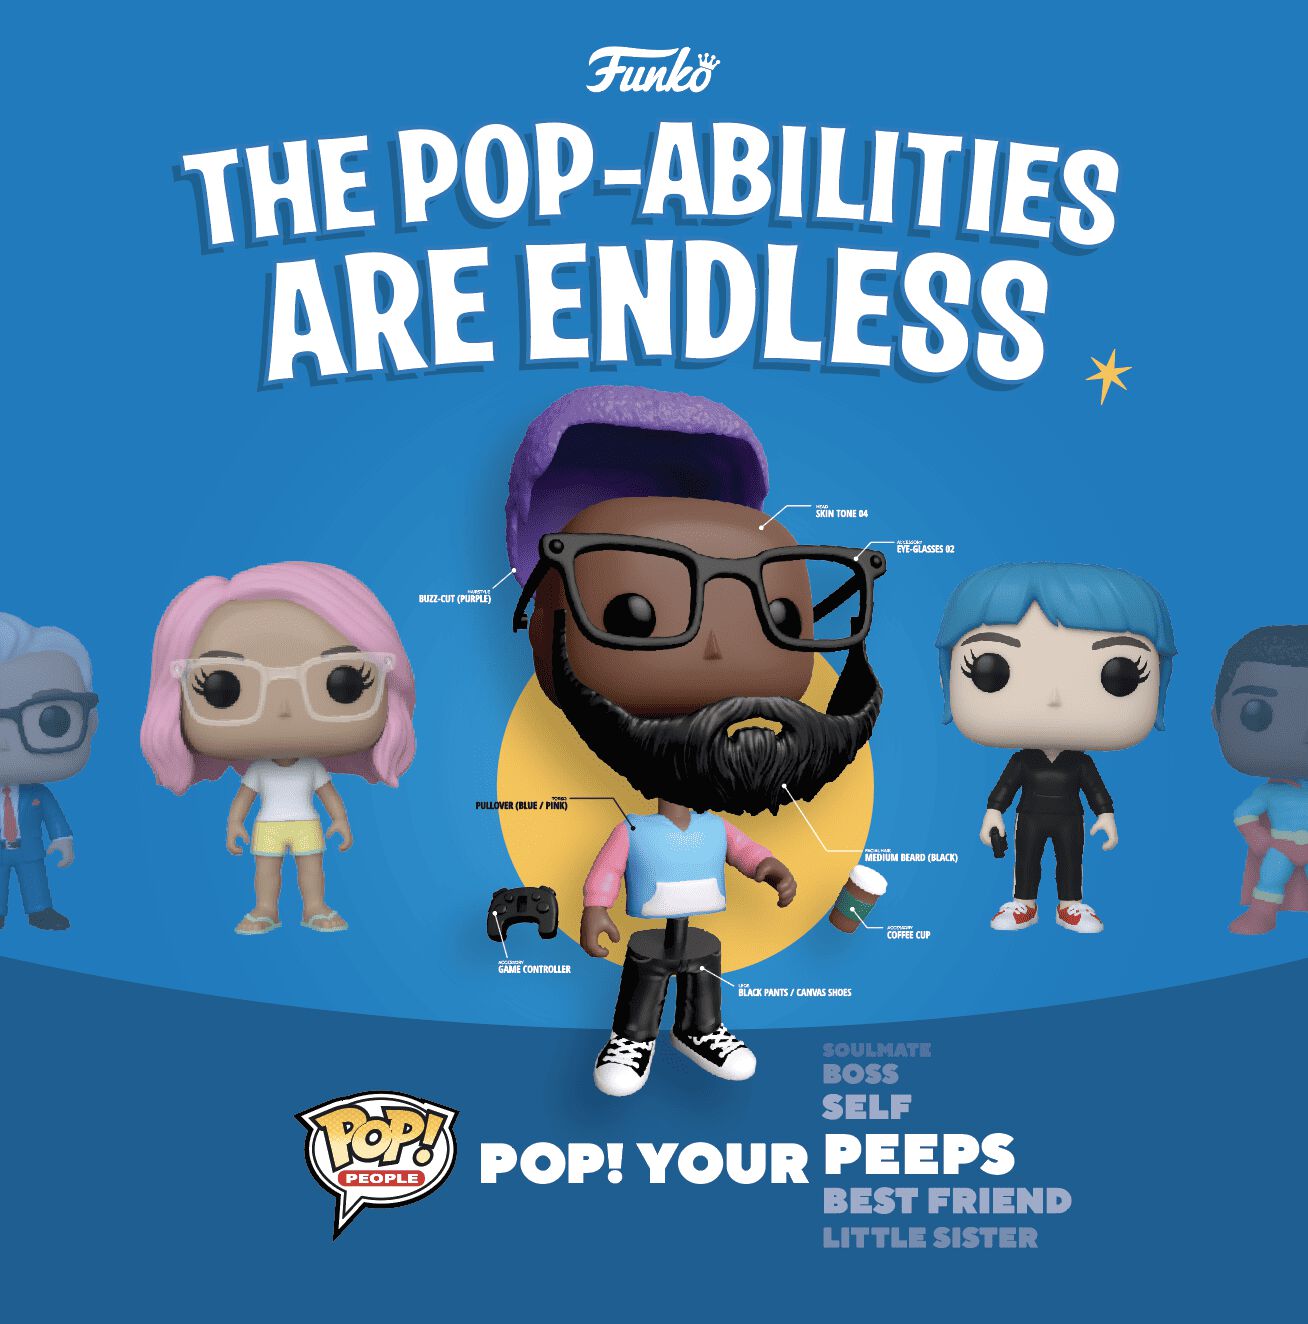 Pop! People at Funko HQ and Funko Hollywood!